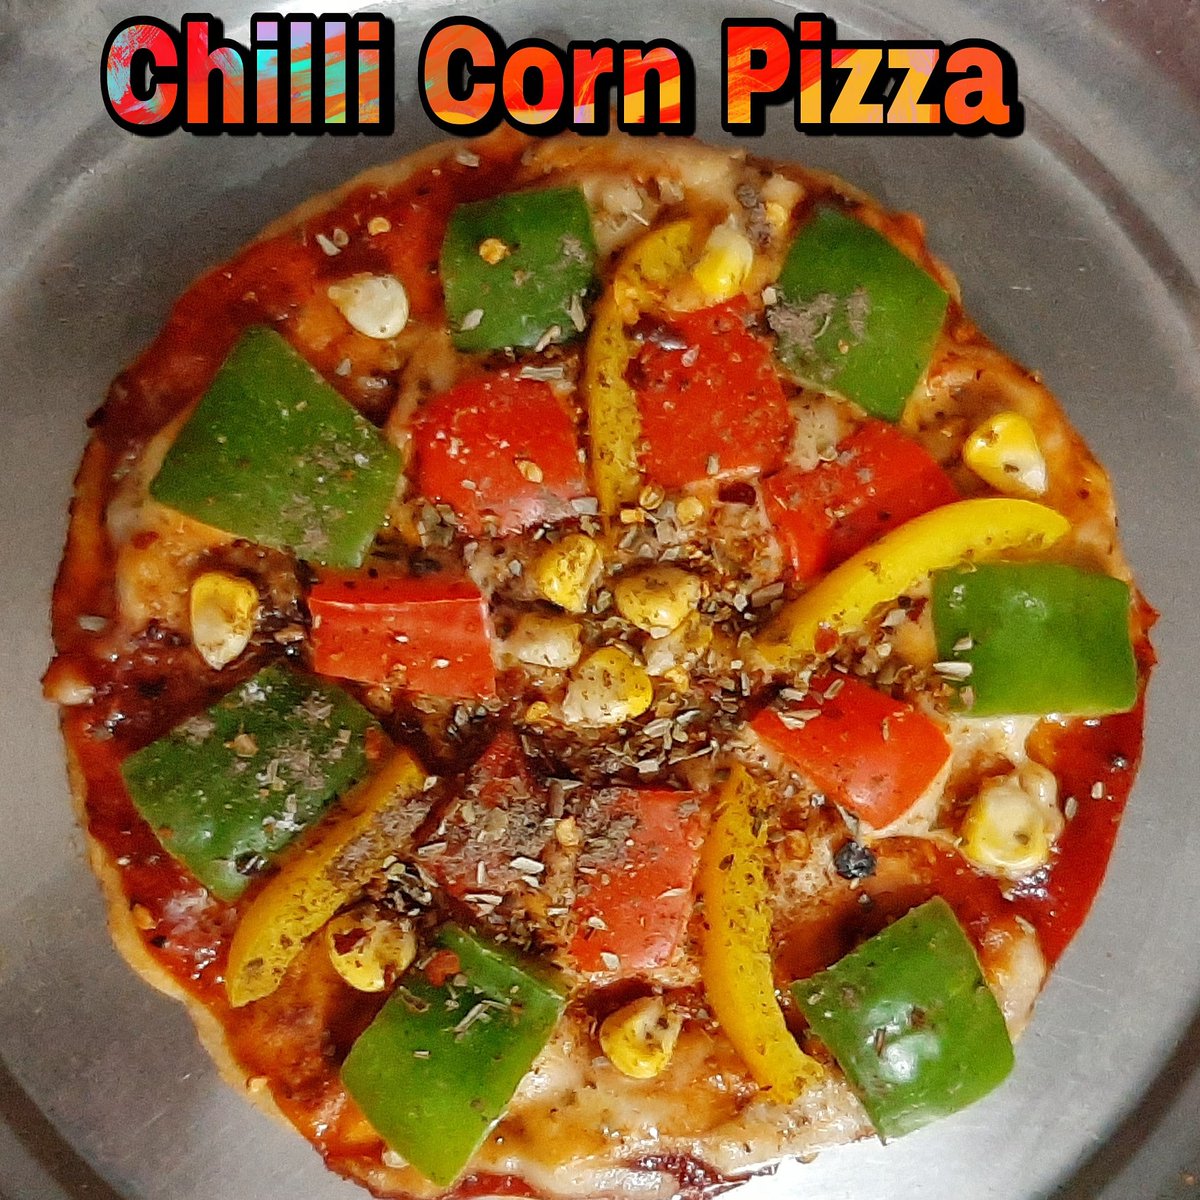 My recipe - Chilli Corn Pizza / Tasty and Healthy / Everyone's Favourite
Go and watch the full video, link is here:
youtu.be/-HHMQ7X2Gog
.
.
.
#easytastyquick #easytastyfood #tasty #food #pizza #pizzamania #chillipizza #pizza🍕 #cornpizza #vegpizza #vegfrankie🥘 #tastyfood